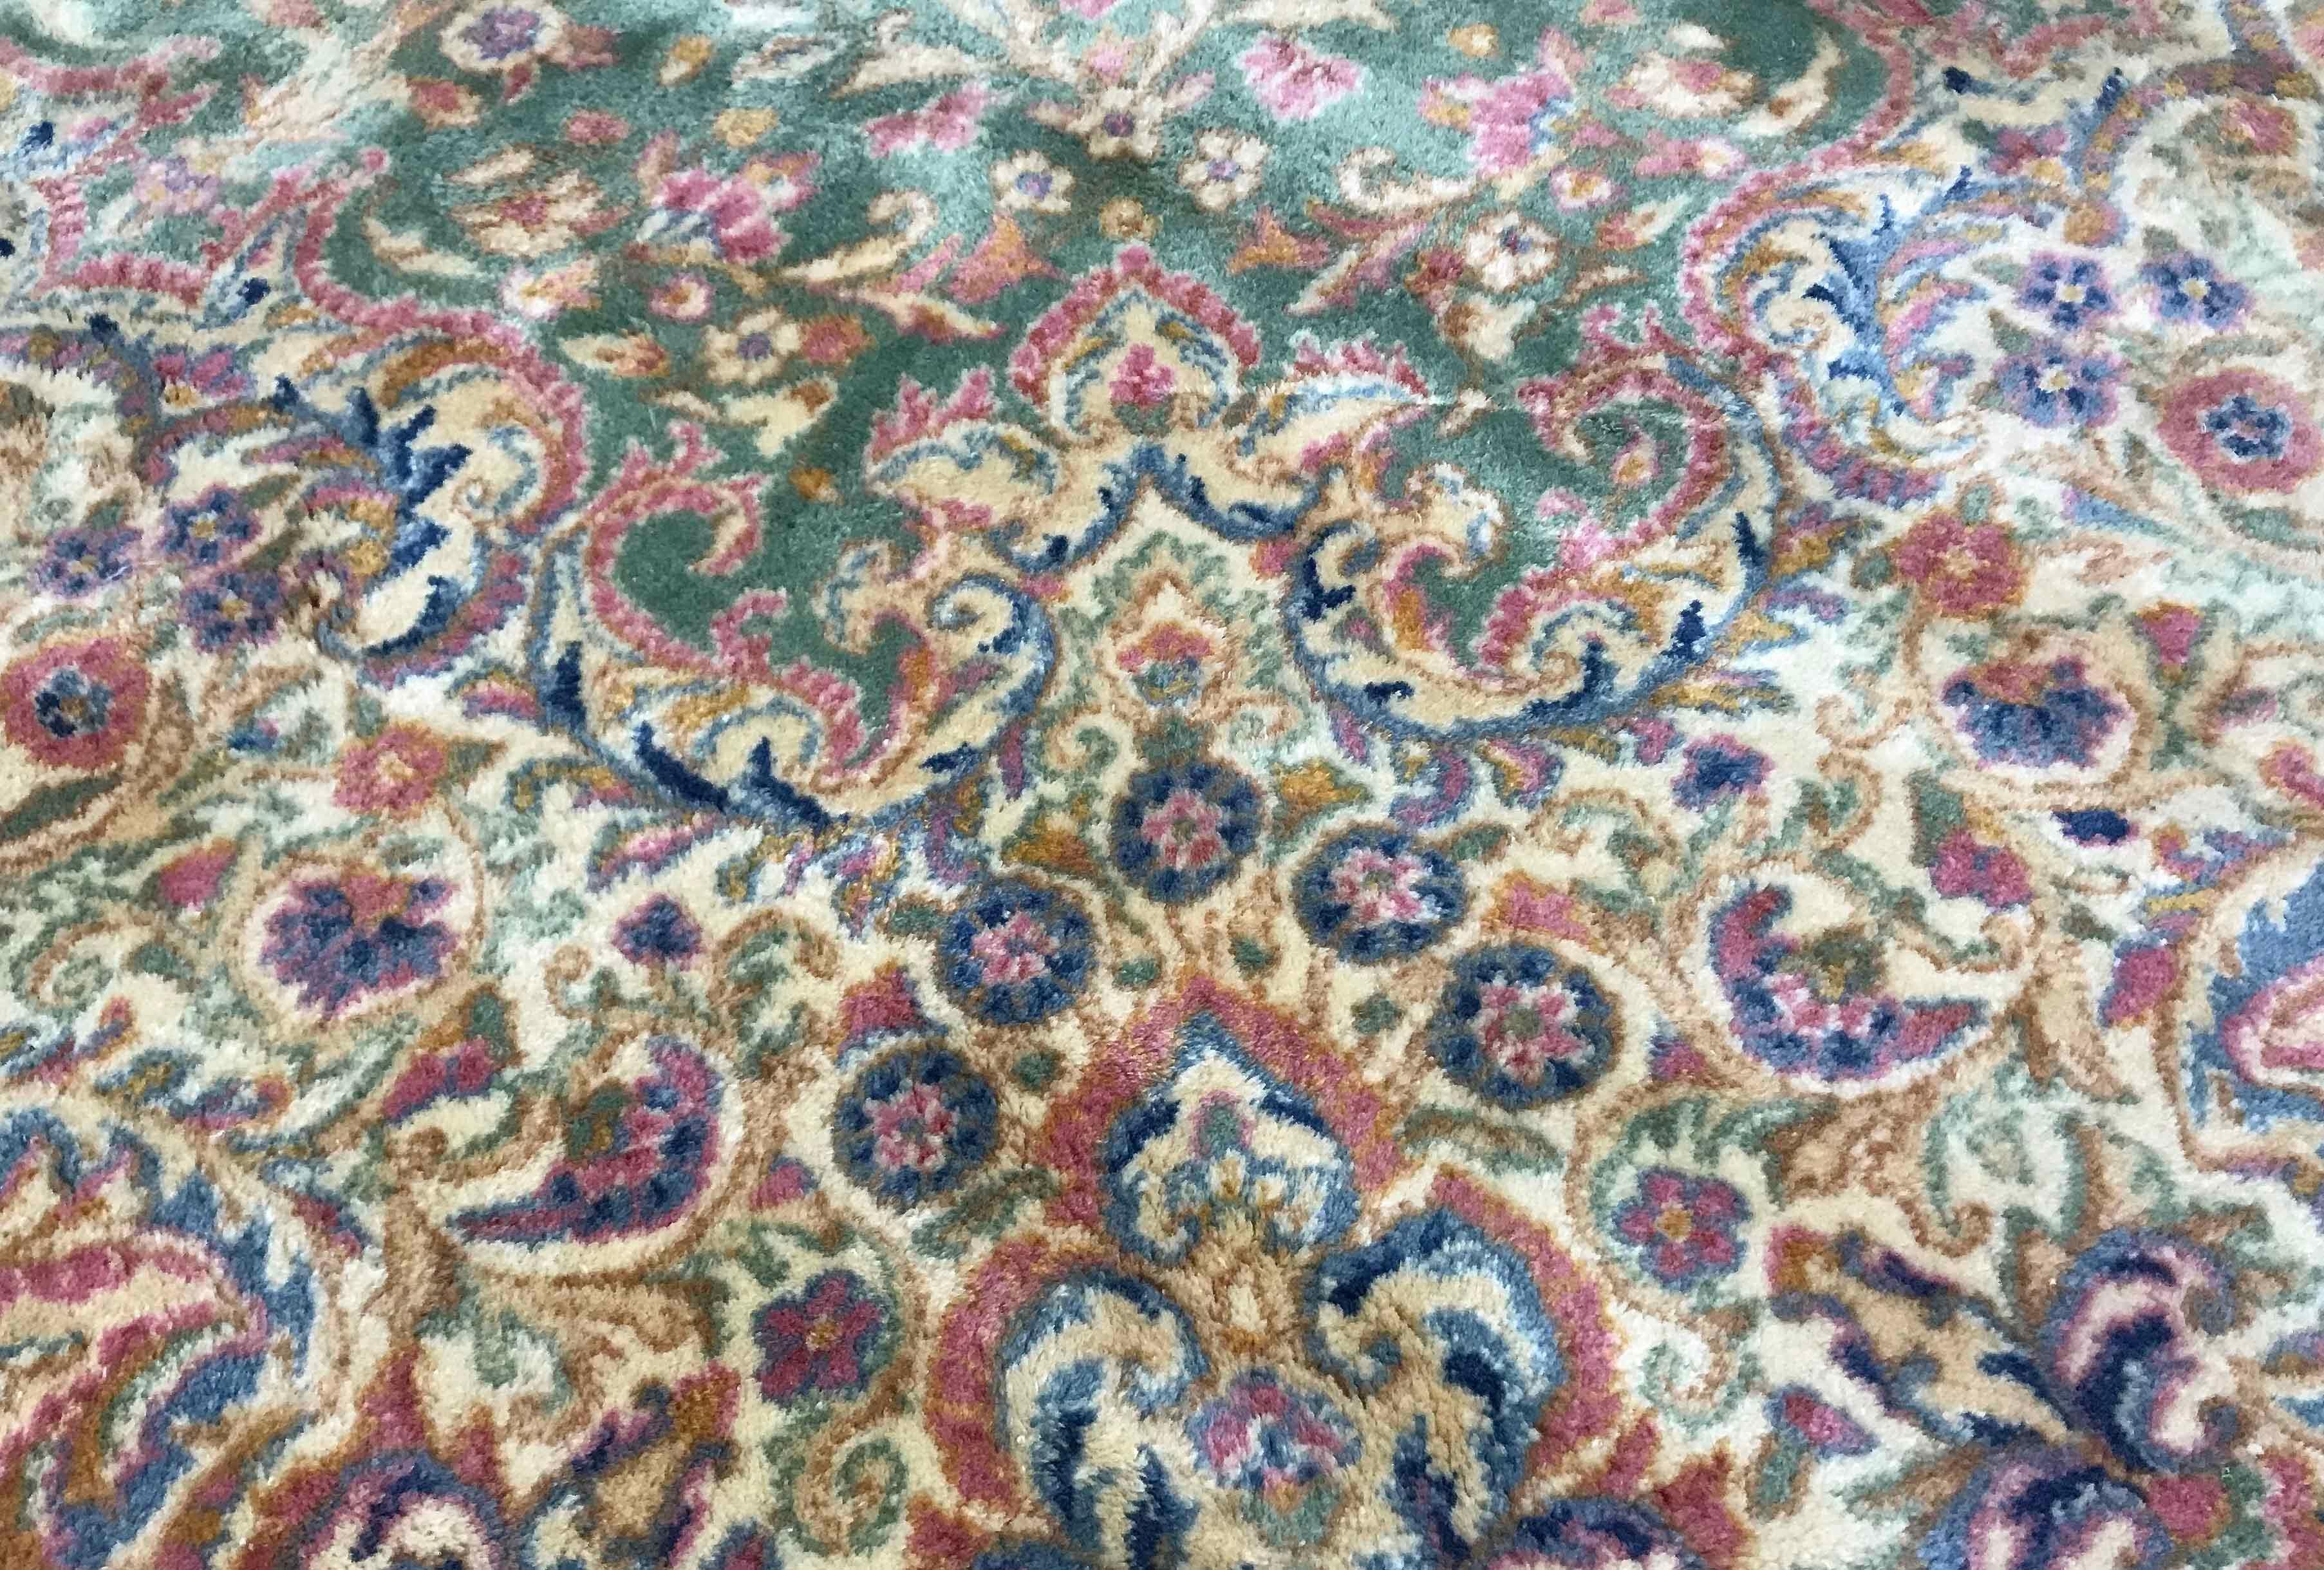 Vintage Persian Kerman Rug, circa 1940. A wonderful composition to this rug with the soft green field both enclosing and surrounded by floral designs in soft gentle pastel colors to create this rug with a gentle style and look. Size: 10' x 14'6.